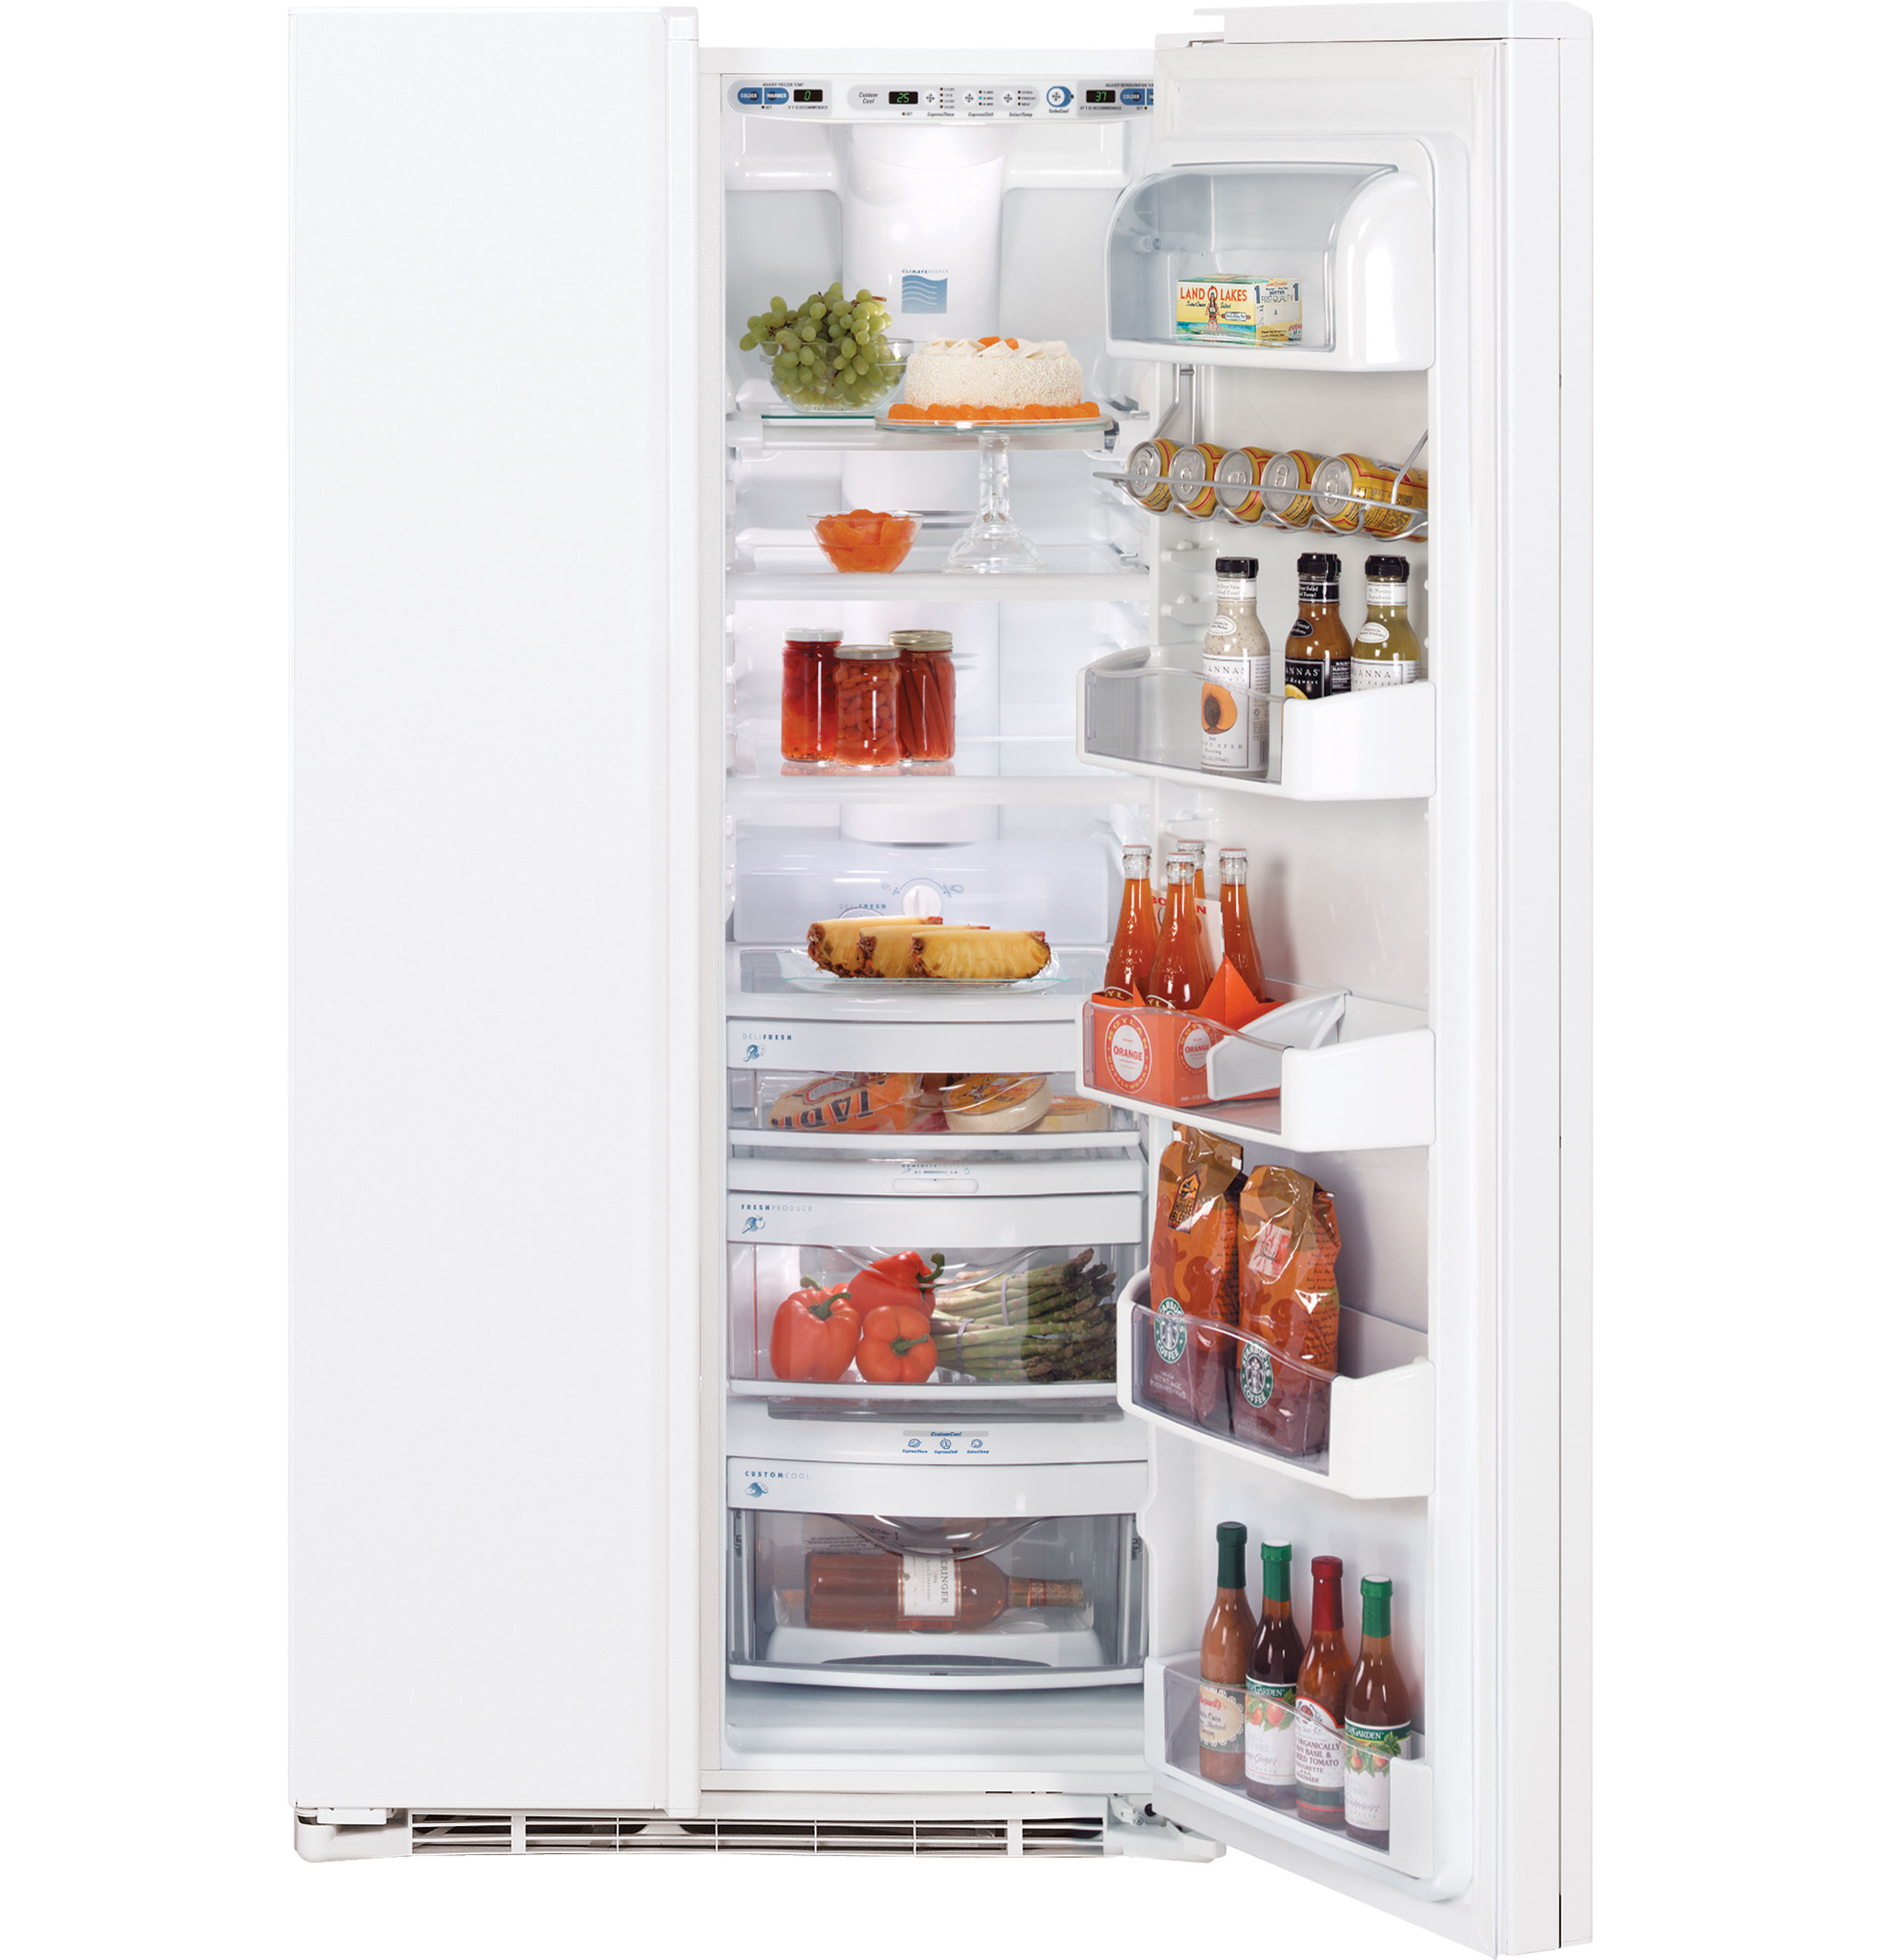 GE Profile CustomStyle™ 22.6 Cu. Ft. Side-by-Side Refrigerator